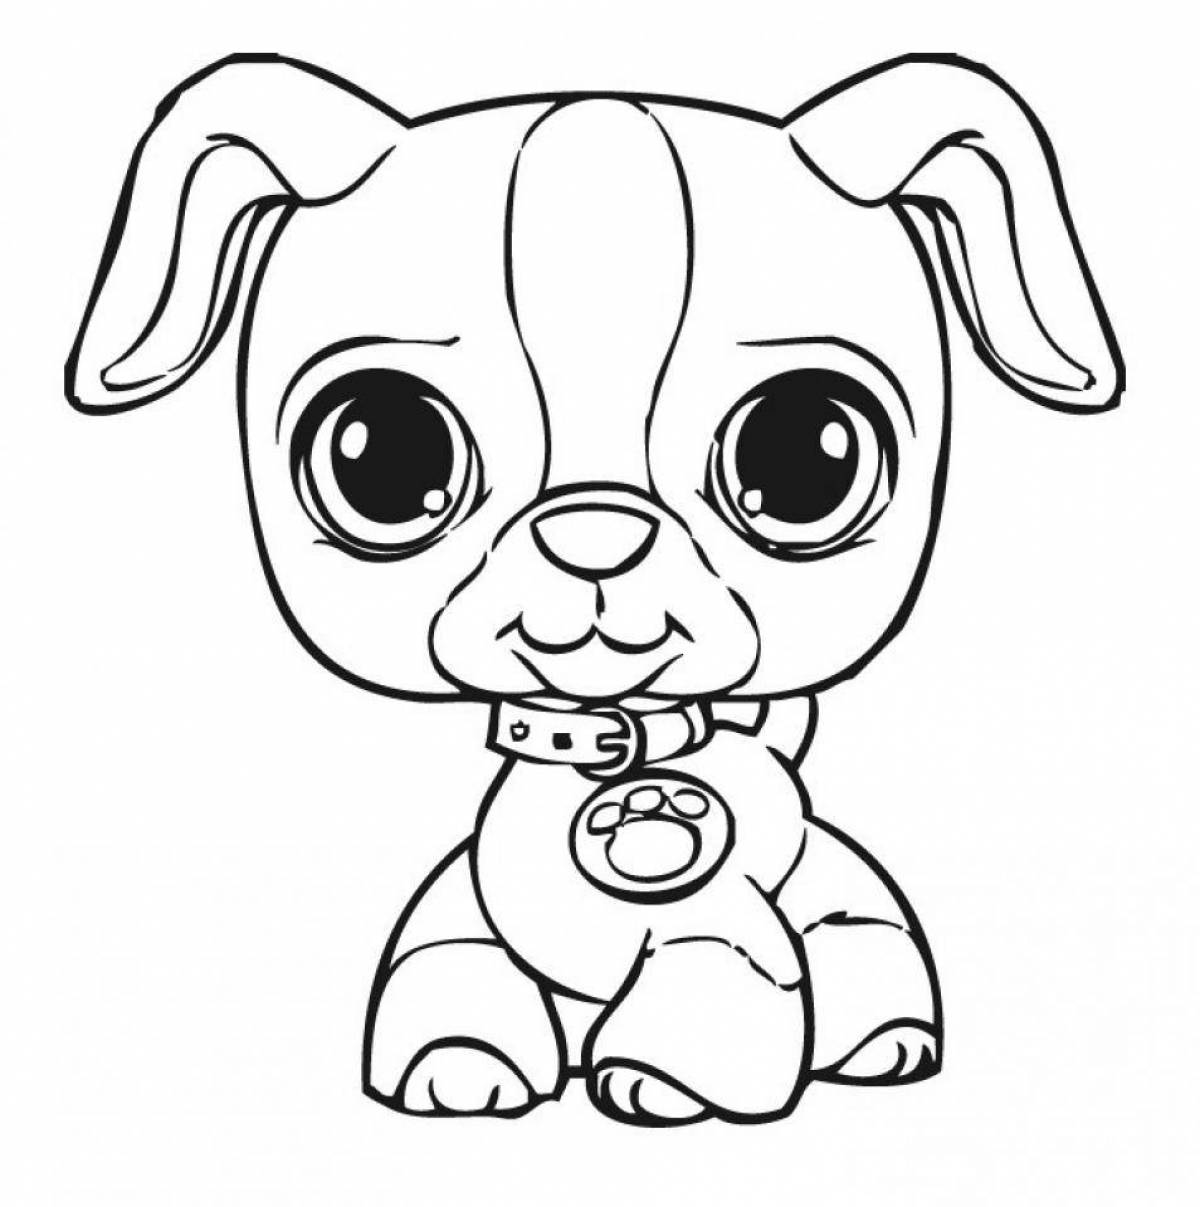 Puppies wiggly coloring page